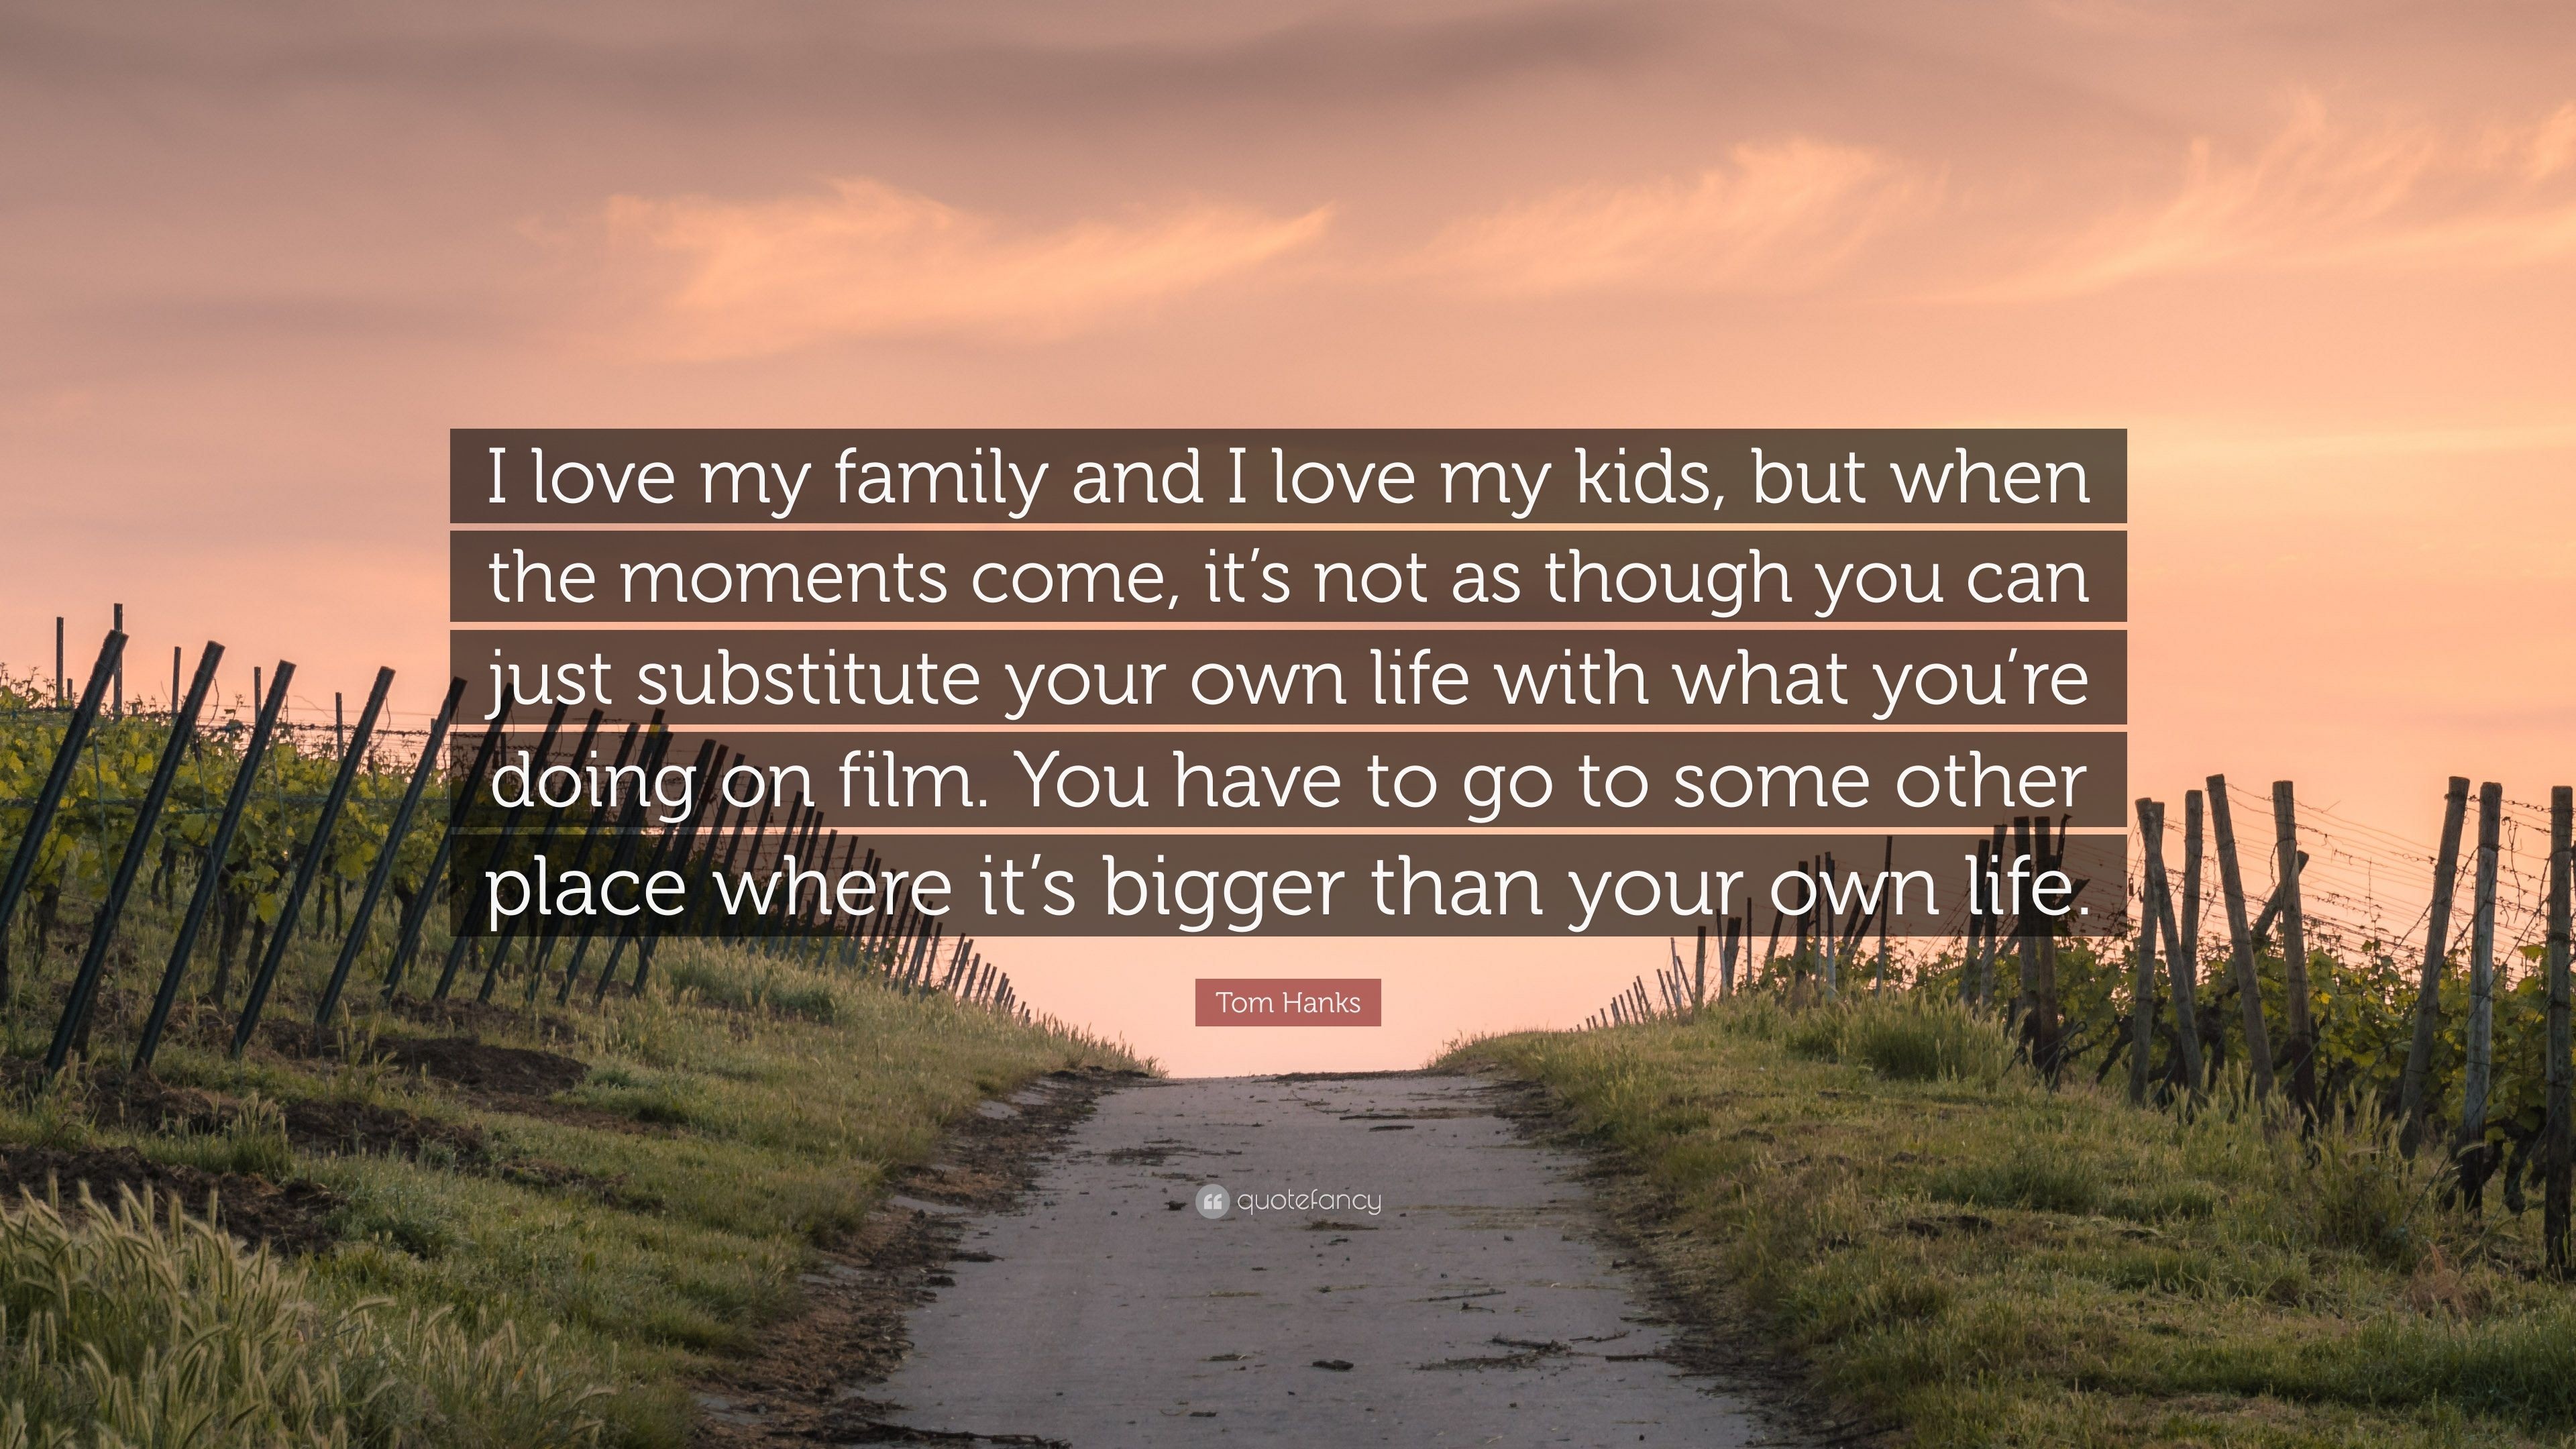 Tom Hanks Quote I love my family and I love my kids, but